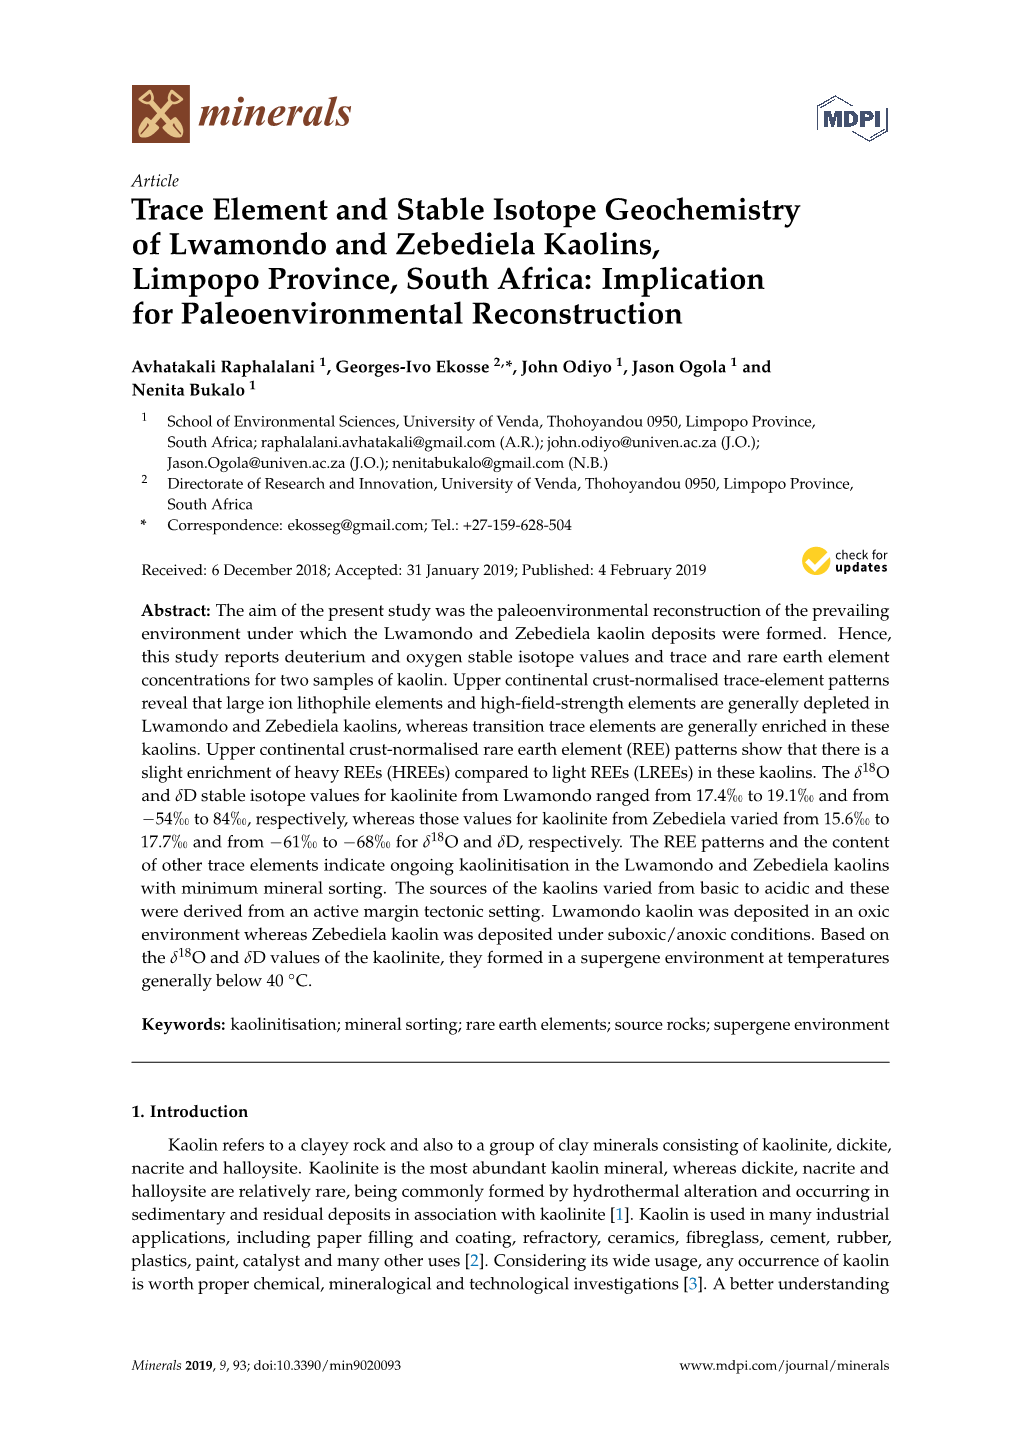 Trace Element and Stable Isotope Geochemistry of Lwamondo and Zebediela Kaolins, Limpopo Province, South Africa: Implication for Paleoenvironmental Reconstruction